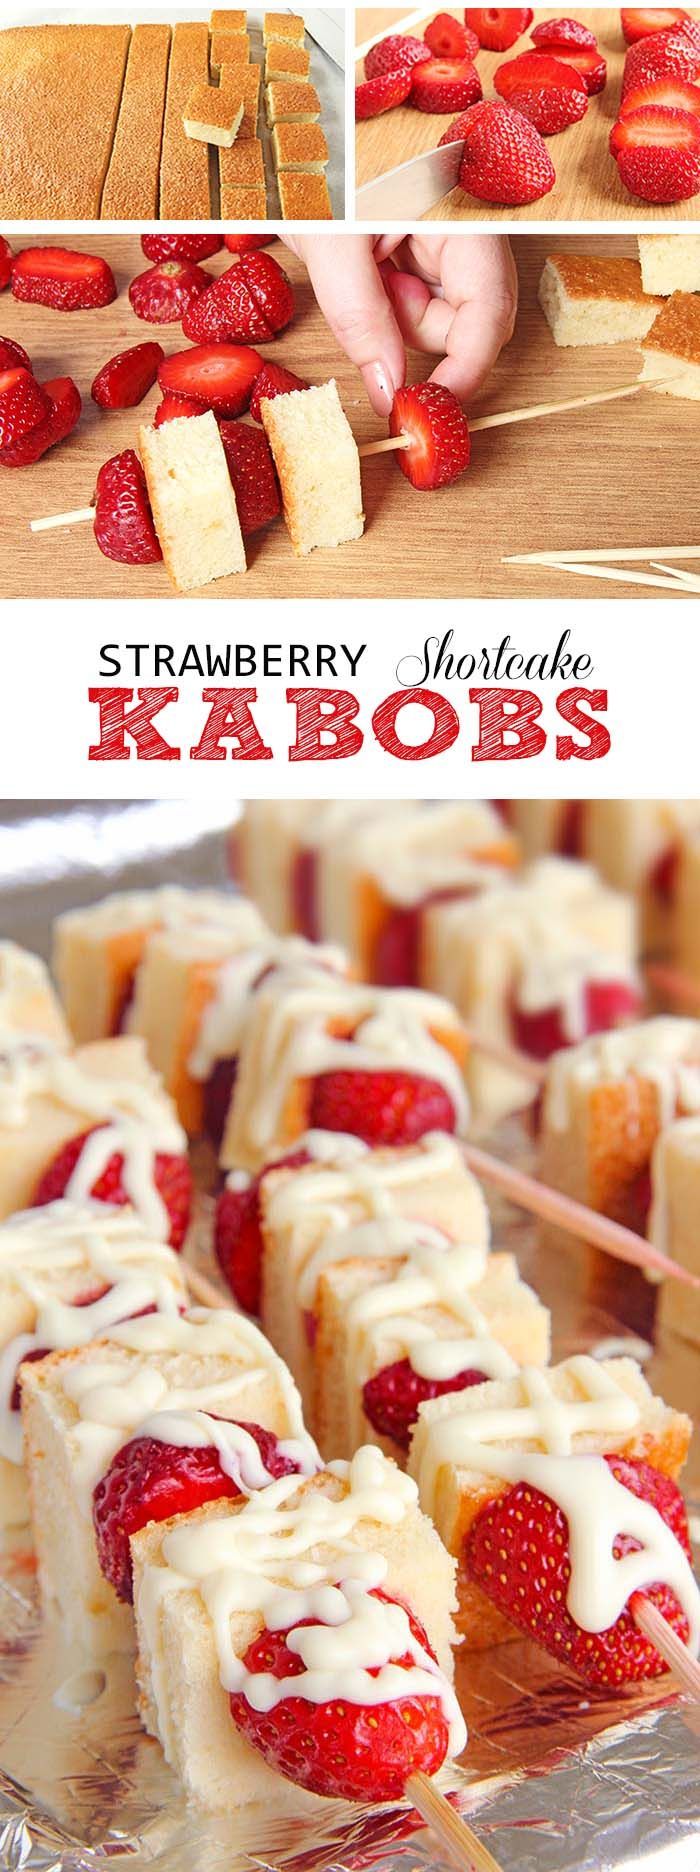 These Strawberry Shortcake Kabobs have all the flavors you may know, are easy to make and tastes amazi